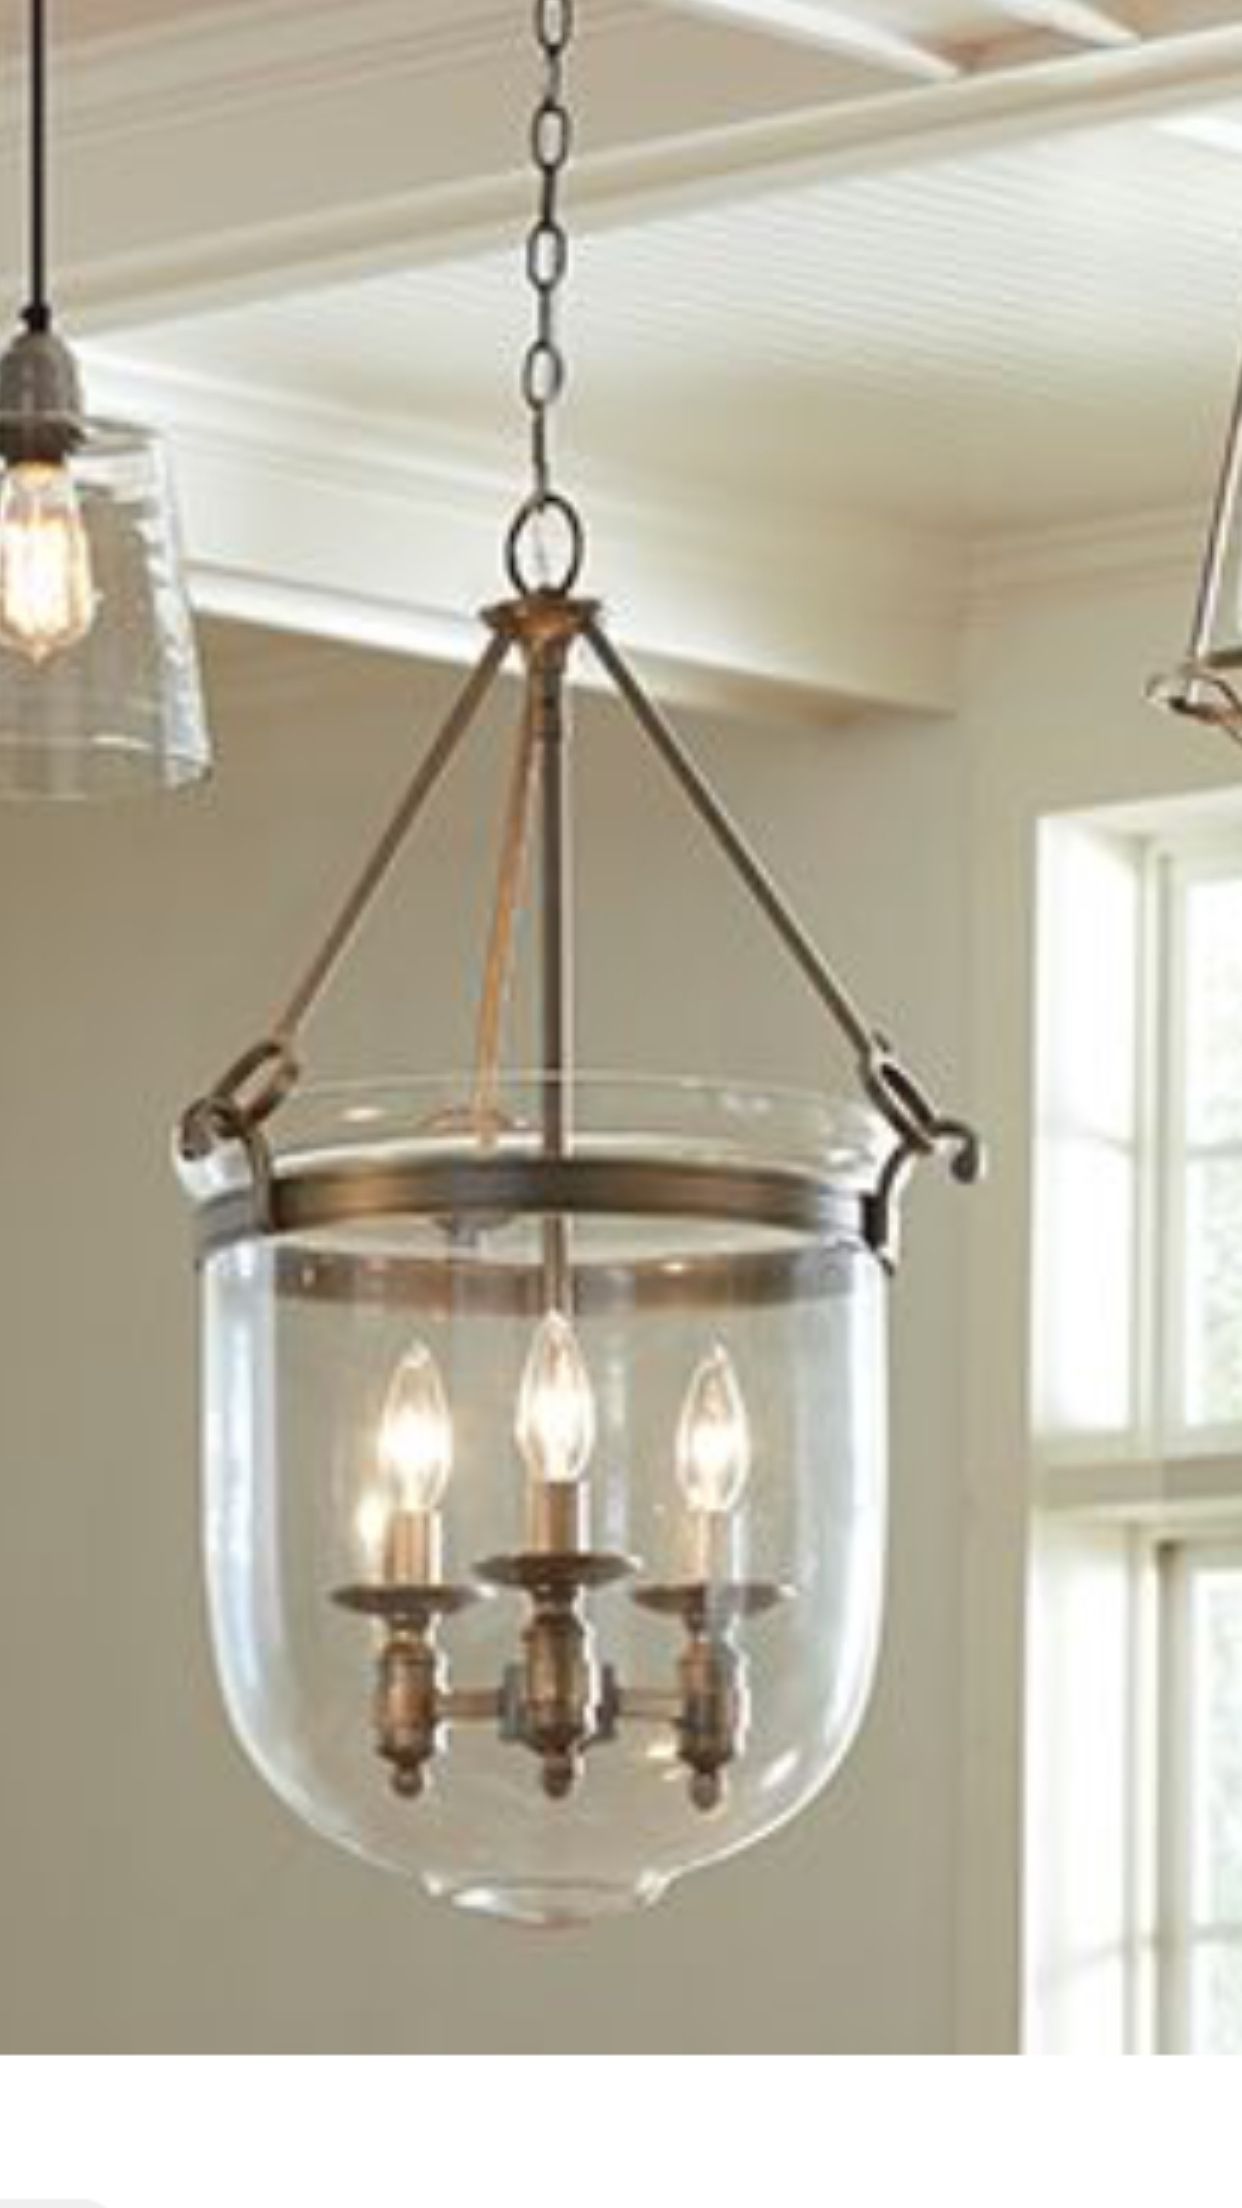 Light Fixture : 2 Story Chandelier 2 Story Foyer Chandelier Height Regarding Most Current Modern Chandeliers For Low Ceilings (View 3 of 15)